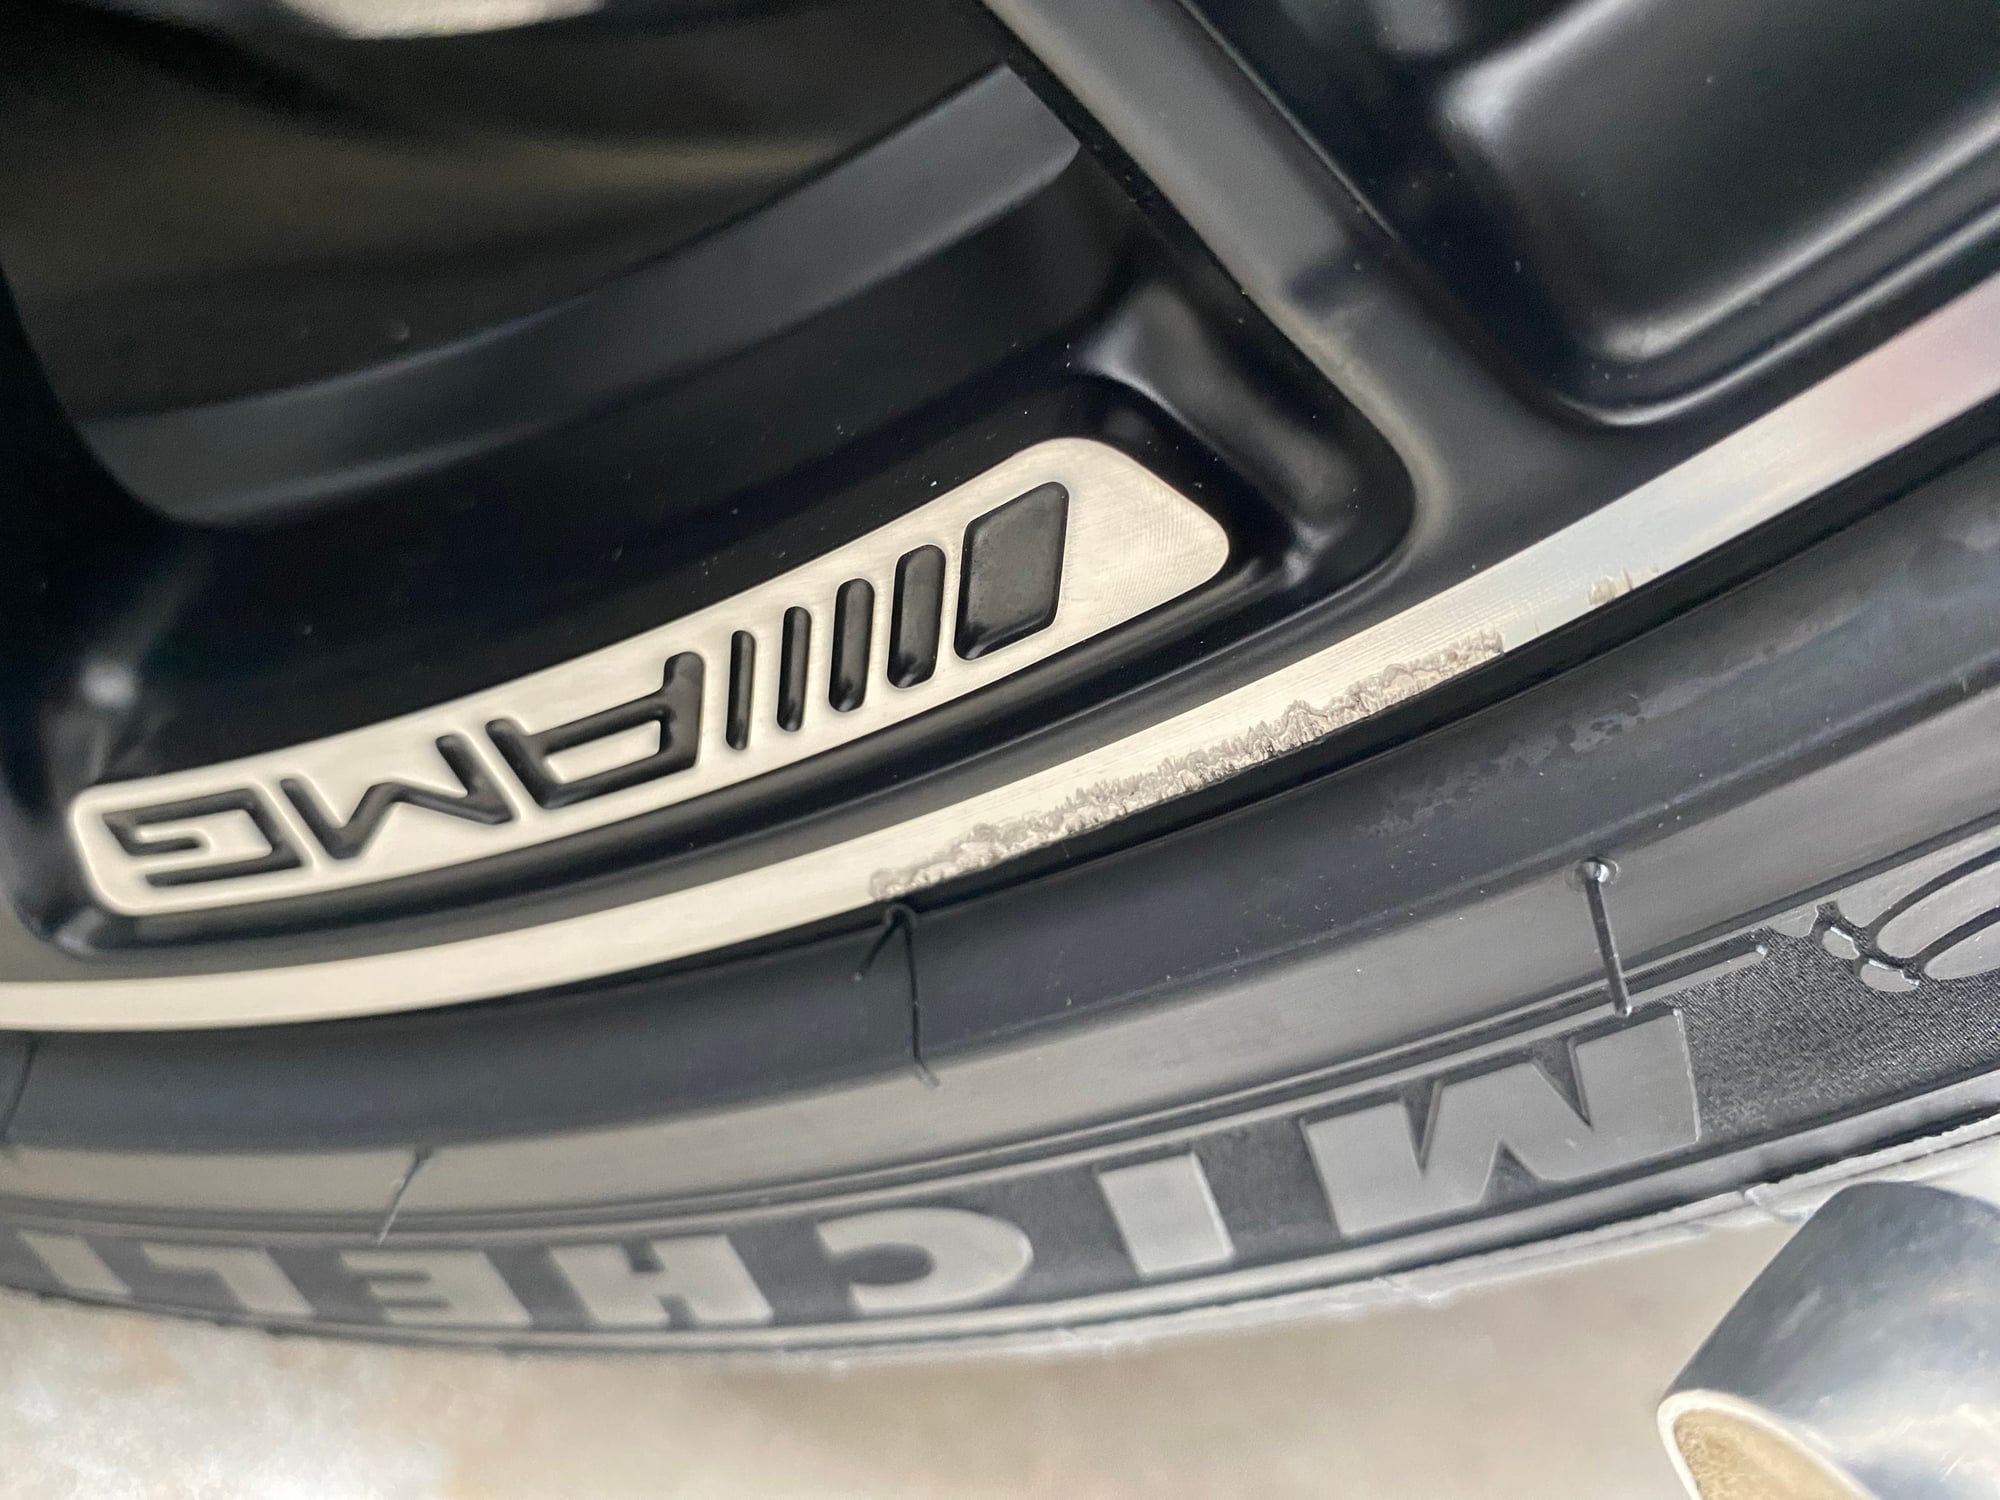 Wheels and Tires/Axles - 2019 C63s Coupe AMG cross spoke black 19/20 wheels - Used - 2019 to 2023 Mercedes-Benz C63 AMG S - Virginia Beach, VA 23456, United States